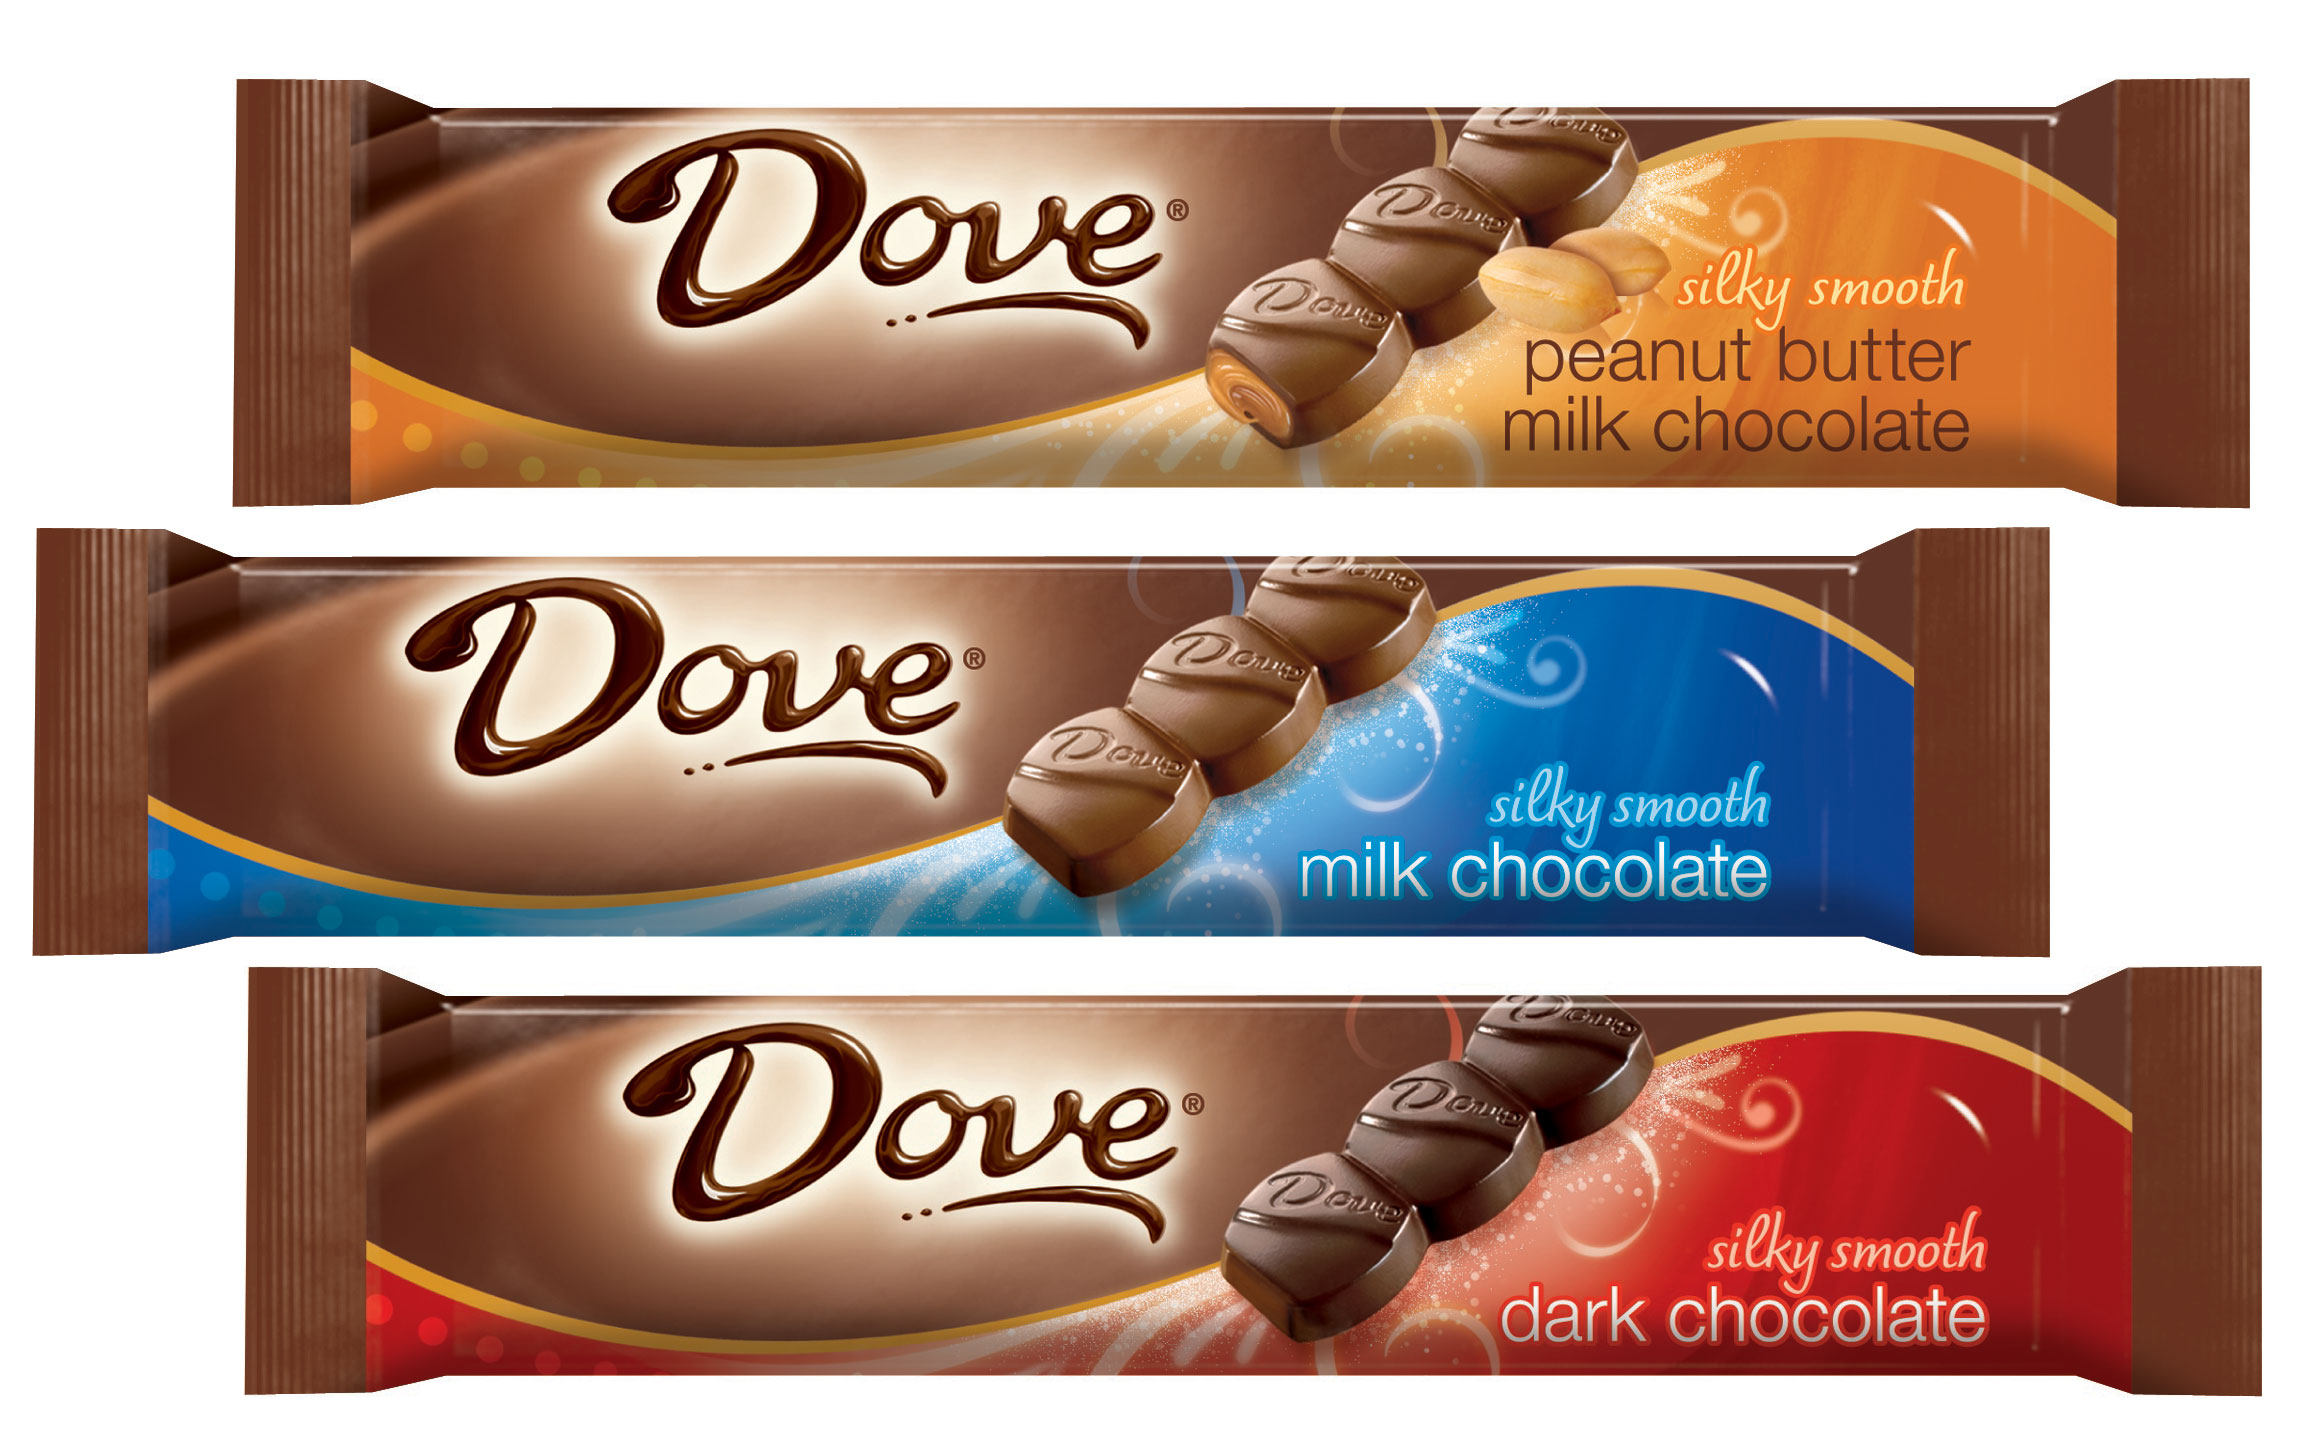 new-0-50-2-dove-silky-smooth-chocolate-bars-coupon-cvs-stacking-deal